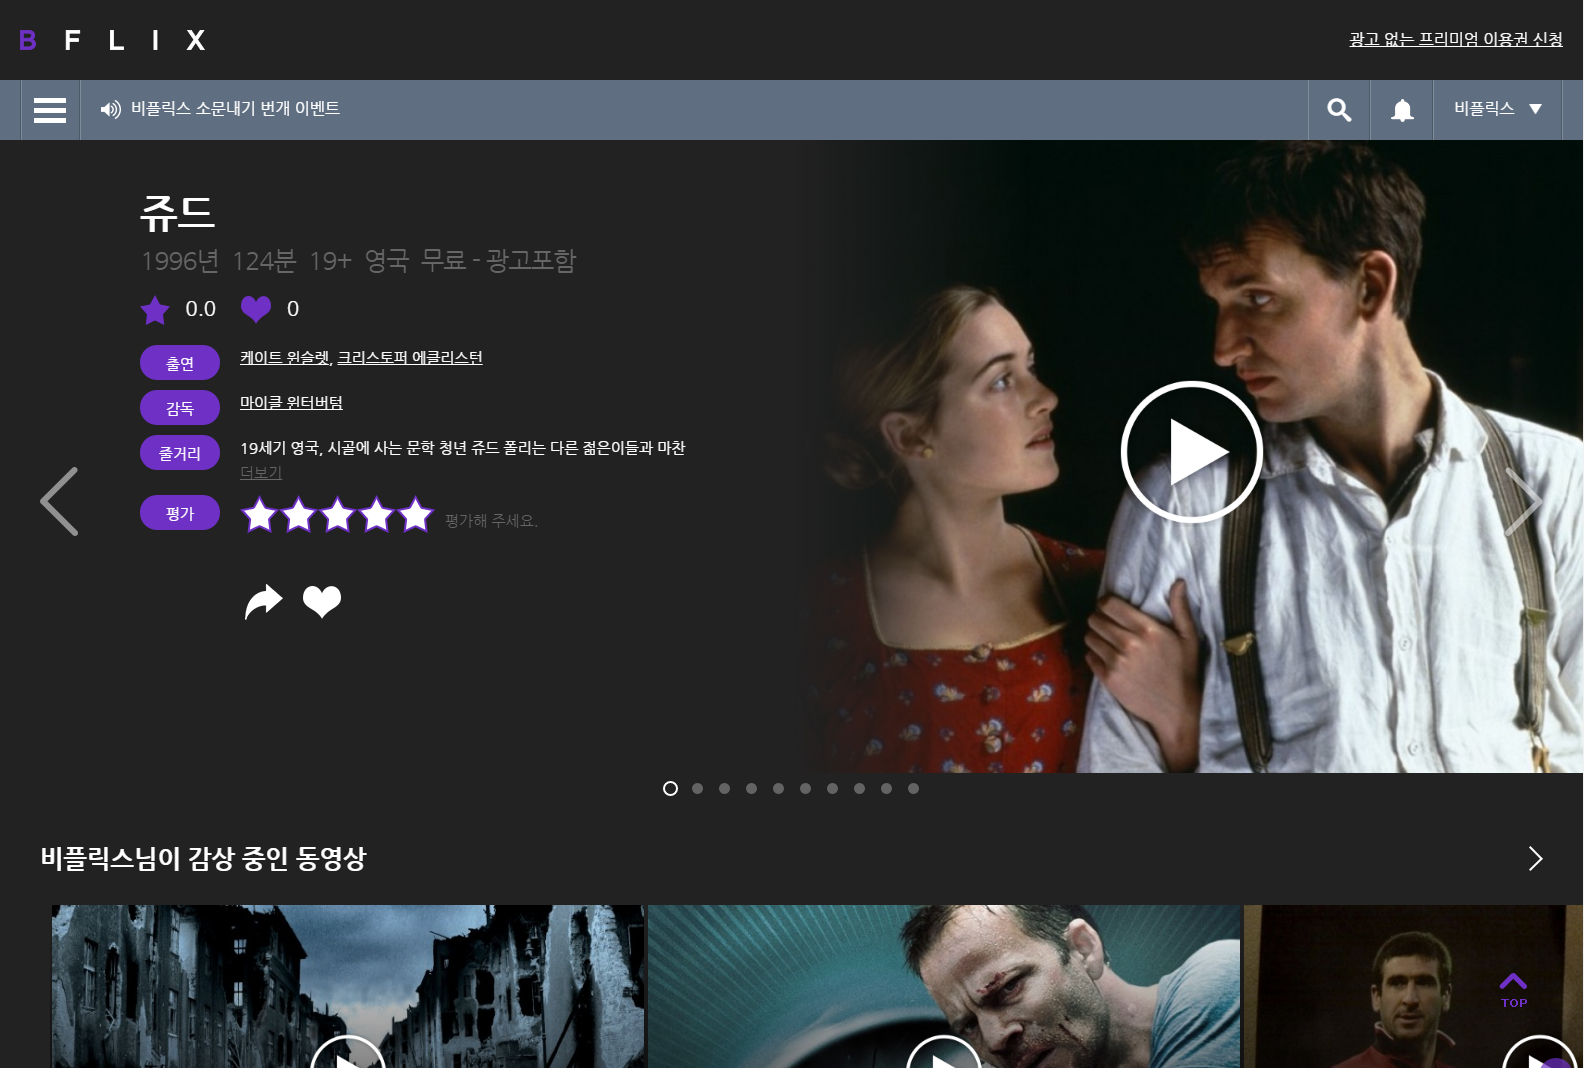 60 Top Images It Movie Streaming Free / 10 Best Movie Streaming Sites without Sign up - Techzillo